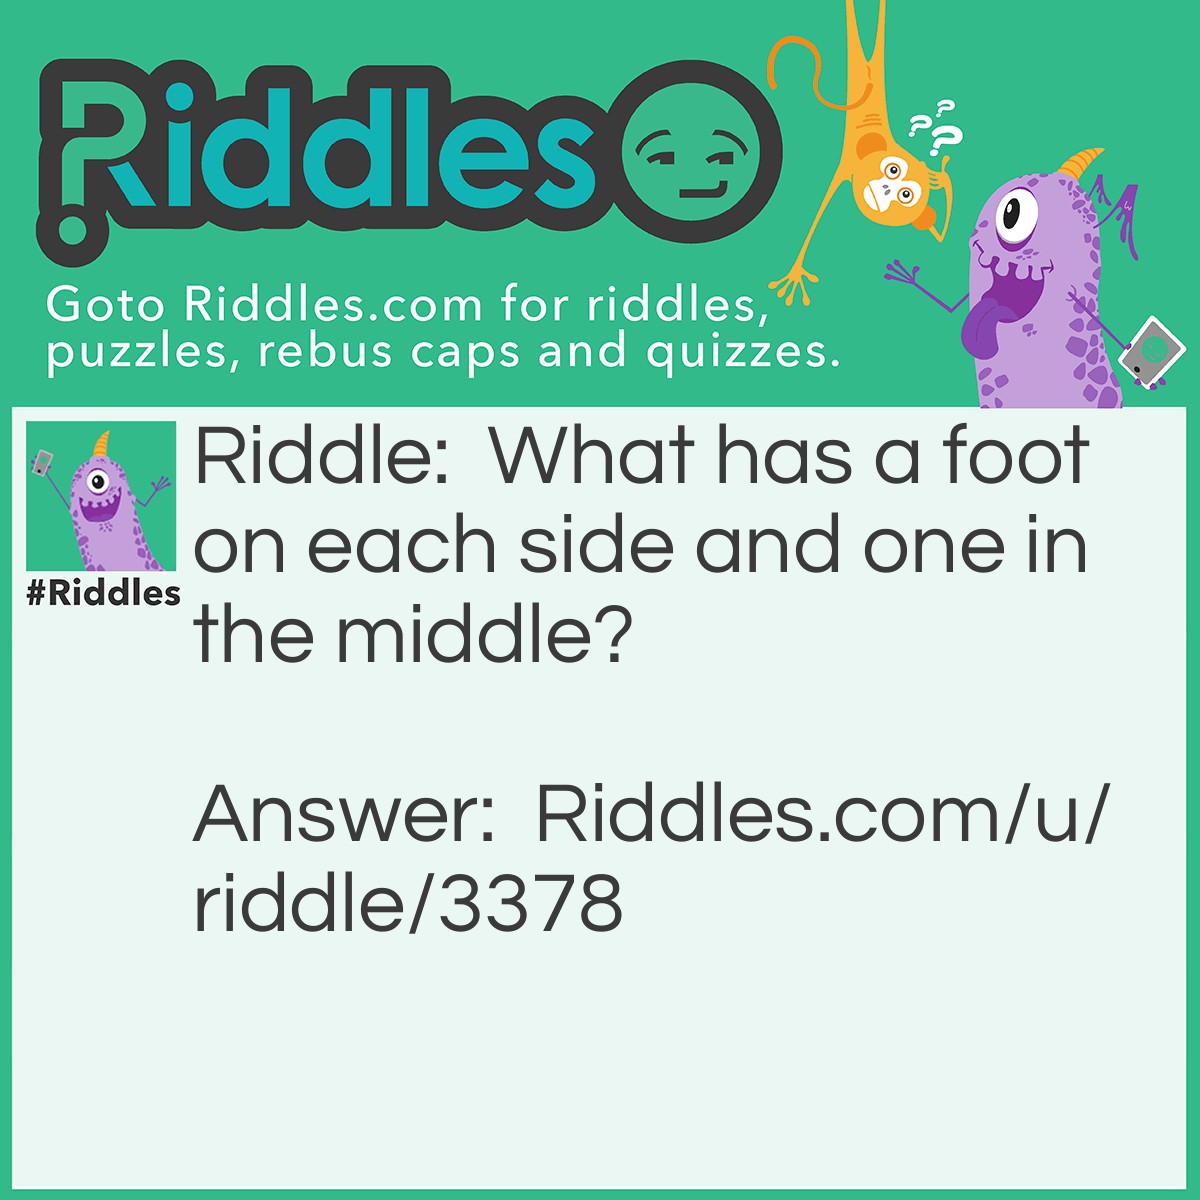 Riddle: What has a foot on each side and one in the middle? Answer: A yardstick.